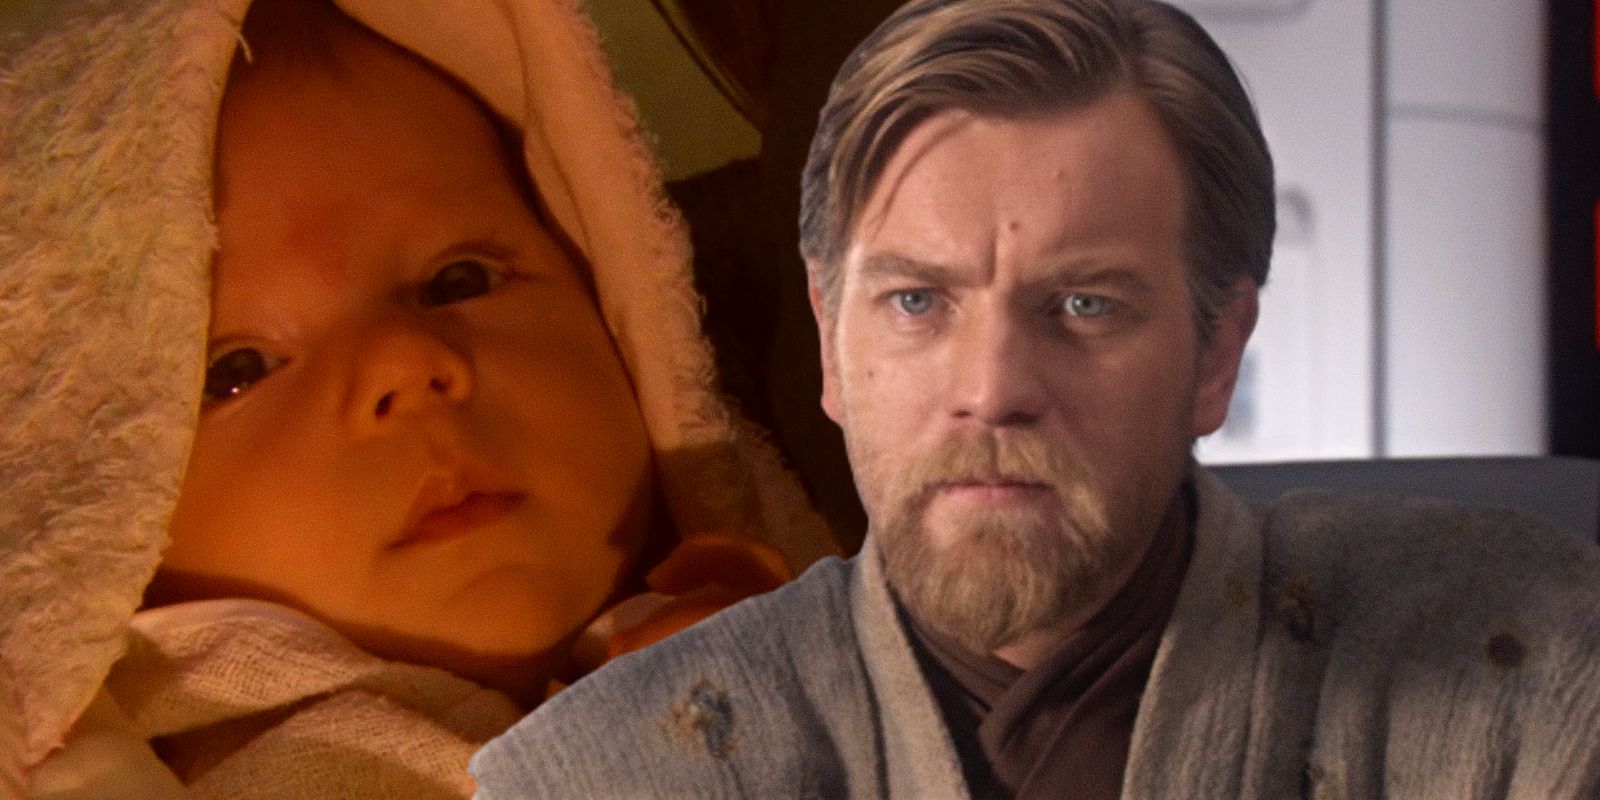 Blended images of baby Leia and Obi Wan in Revenge of the Sith.